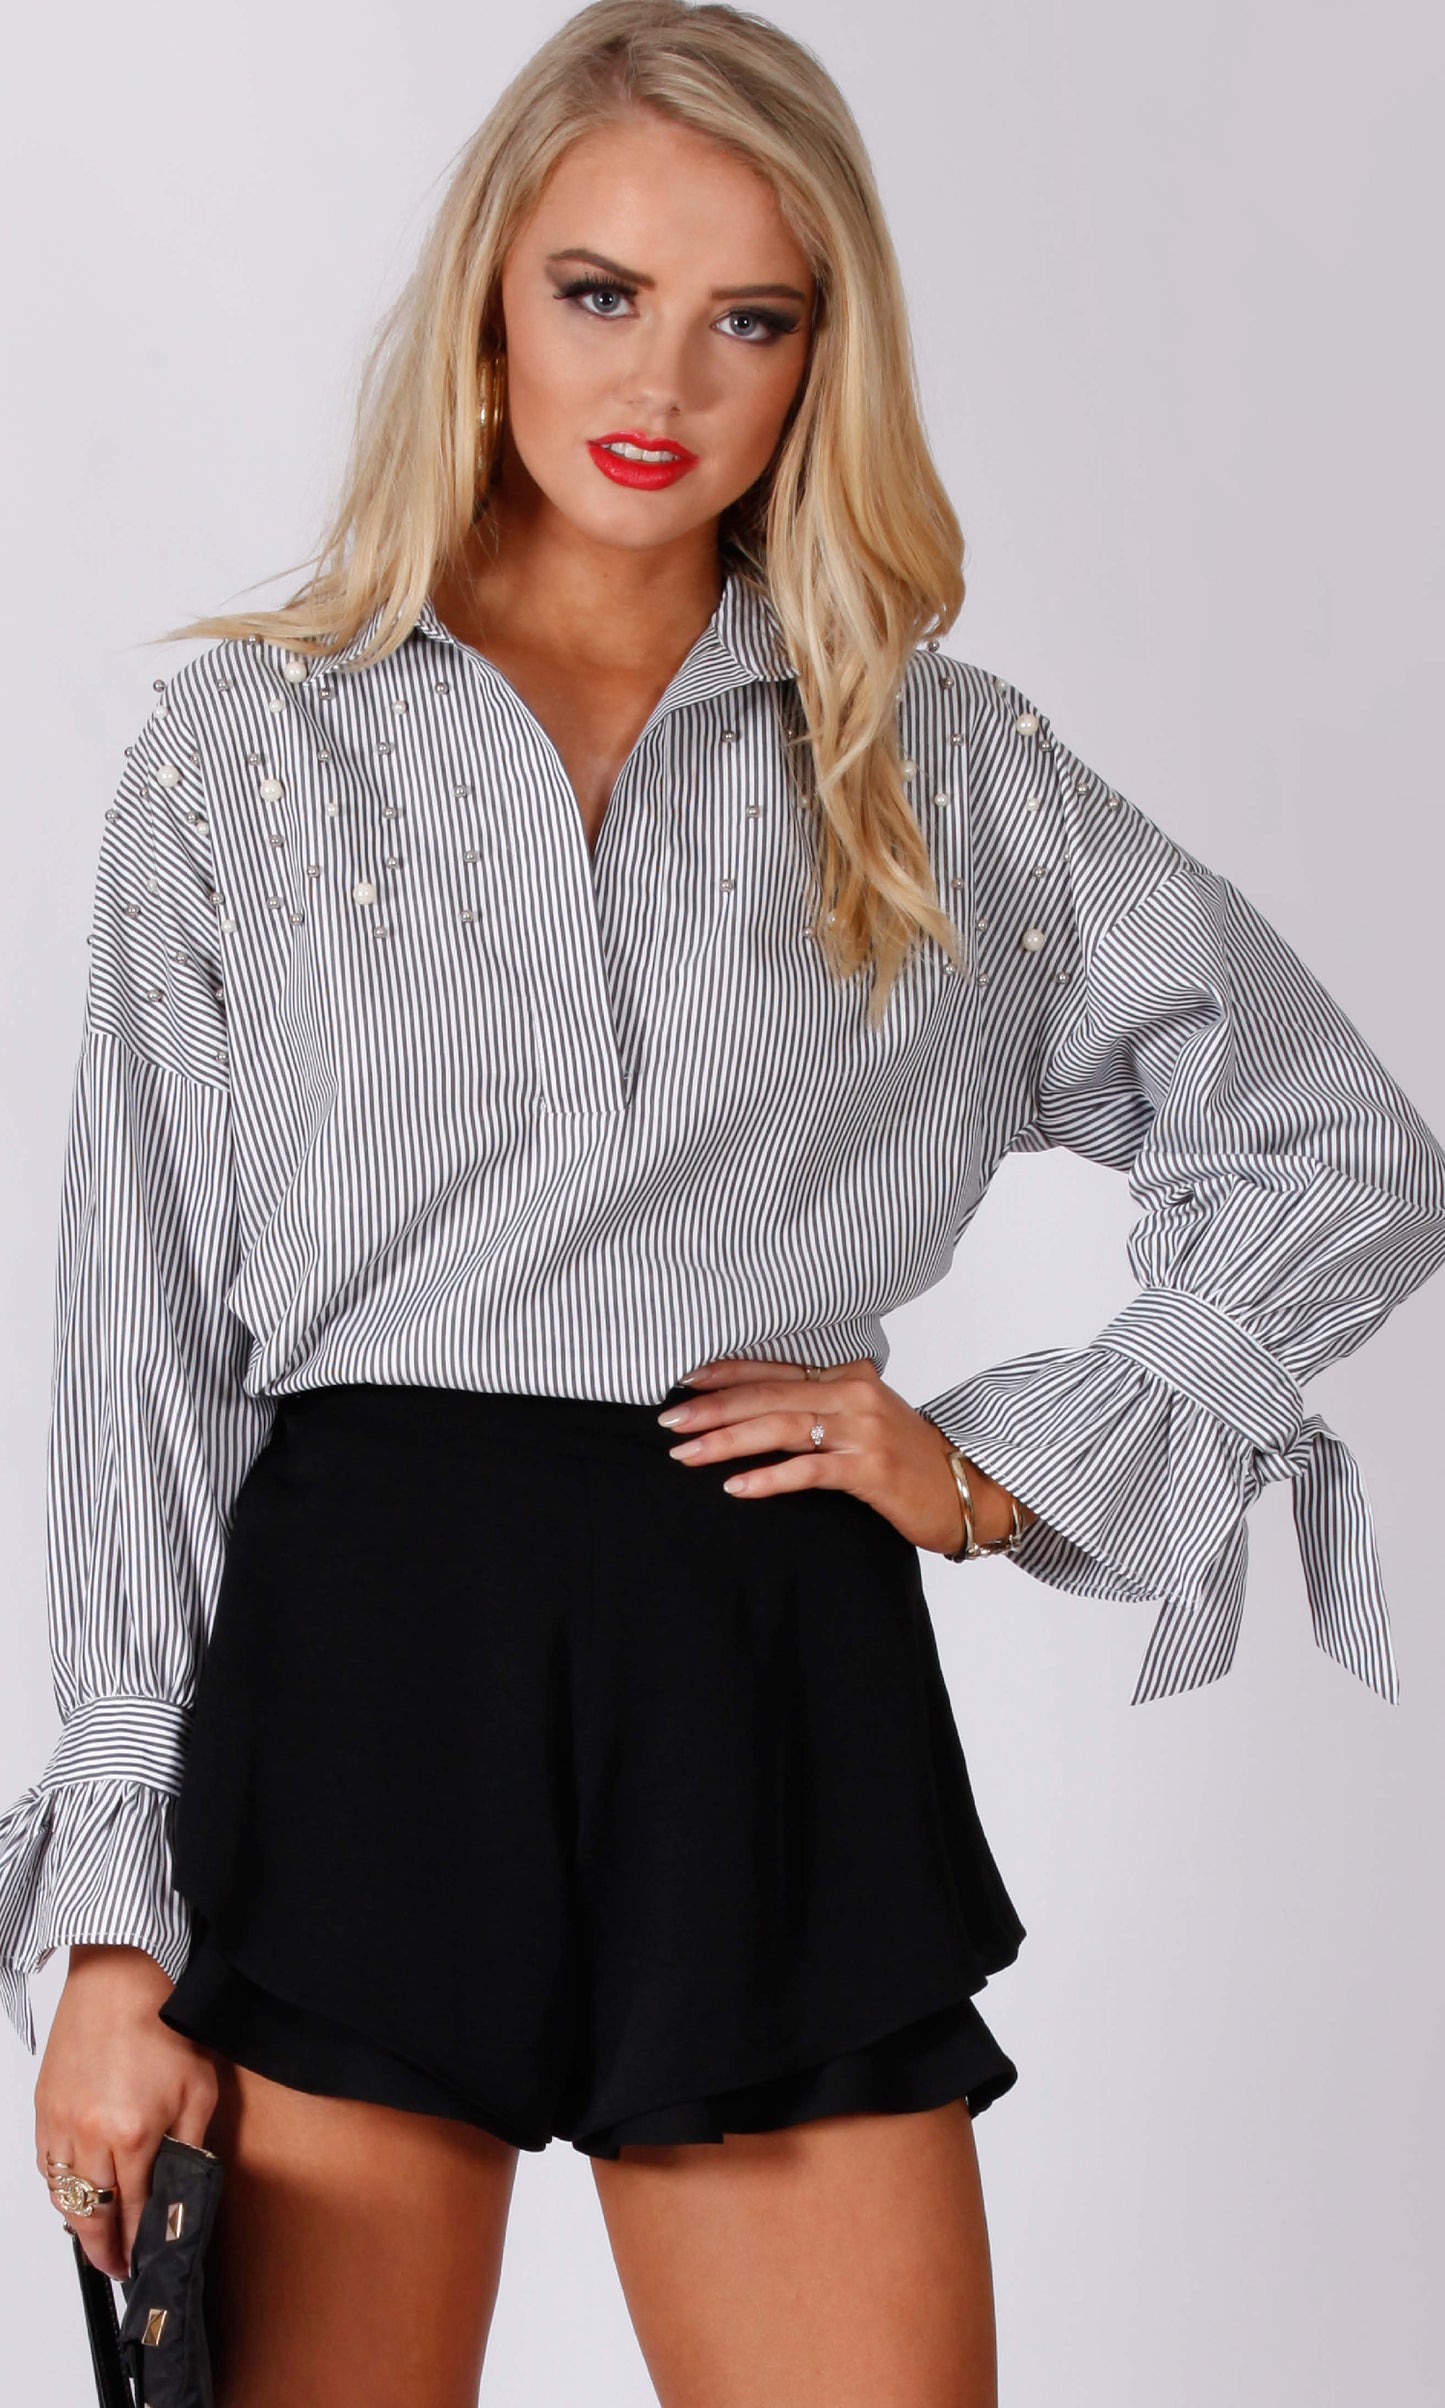 YW17078SS Pinstripe Pearl Embellished shirt (Pack)